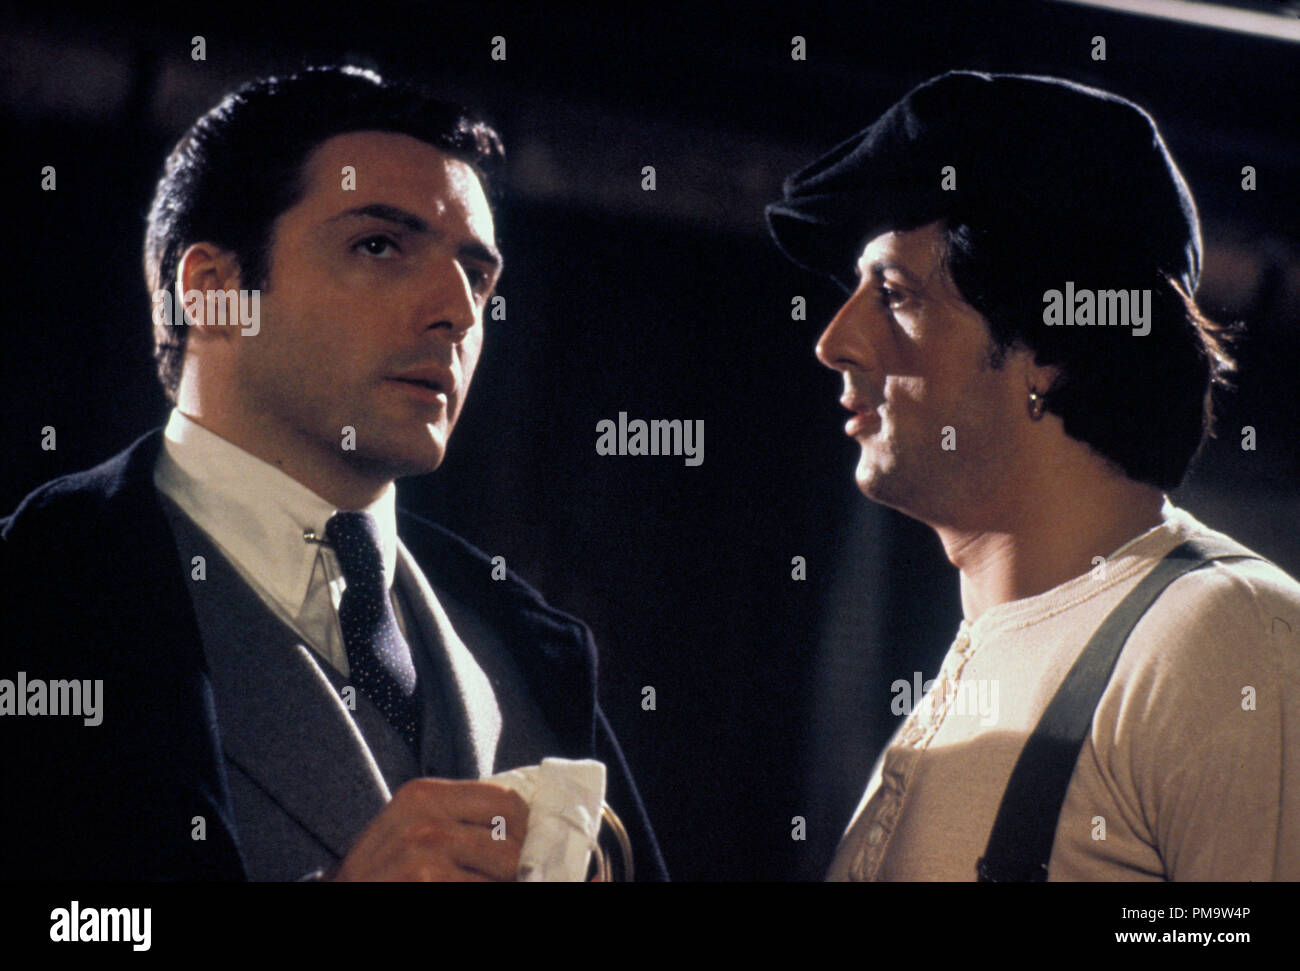 Studio Publicity Still from 'Paradise Alley' Armand Assante, Sylvester Stallone © 1978 Universal C   All Rights Reserved   File Reference # 31720117THA  For Editorial Use Only Stock Photo